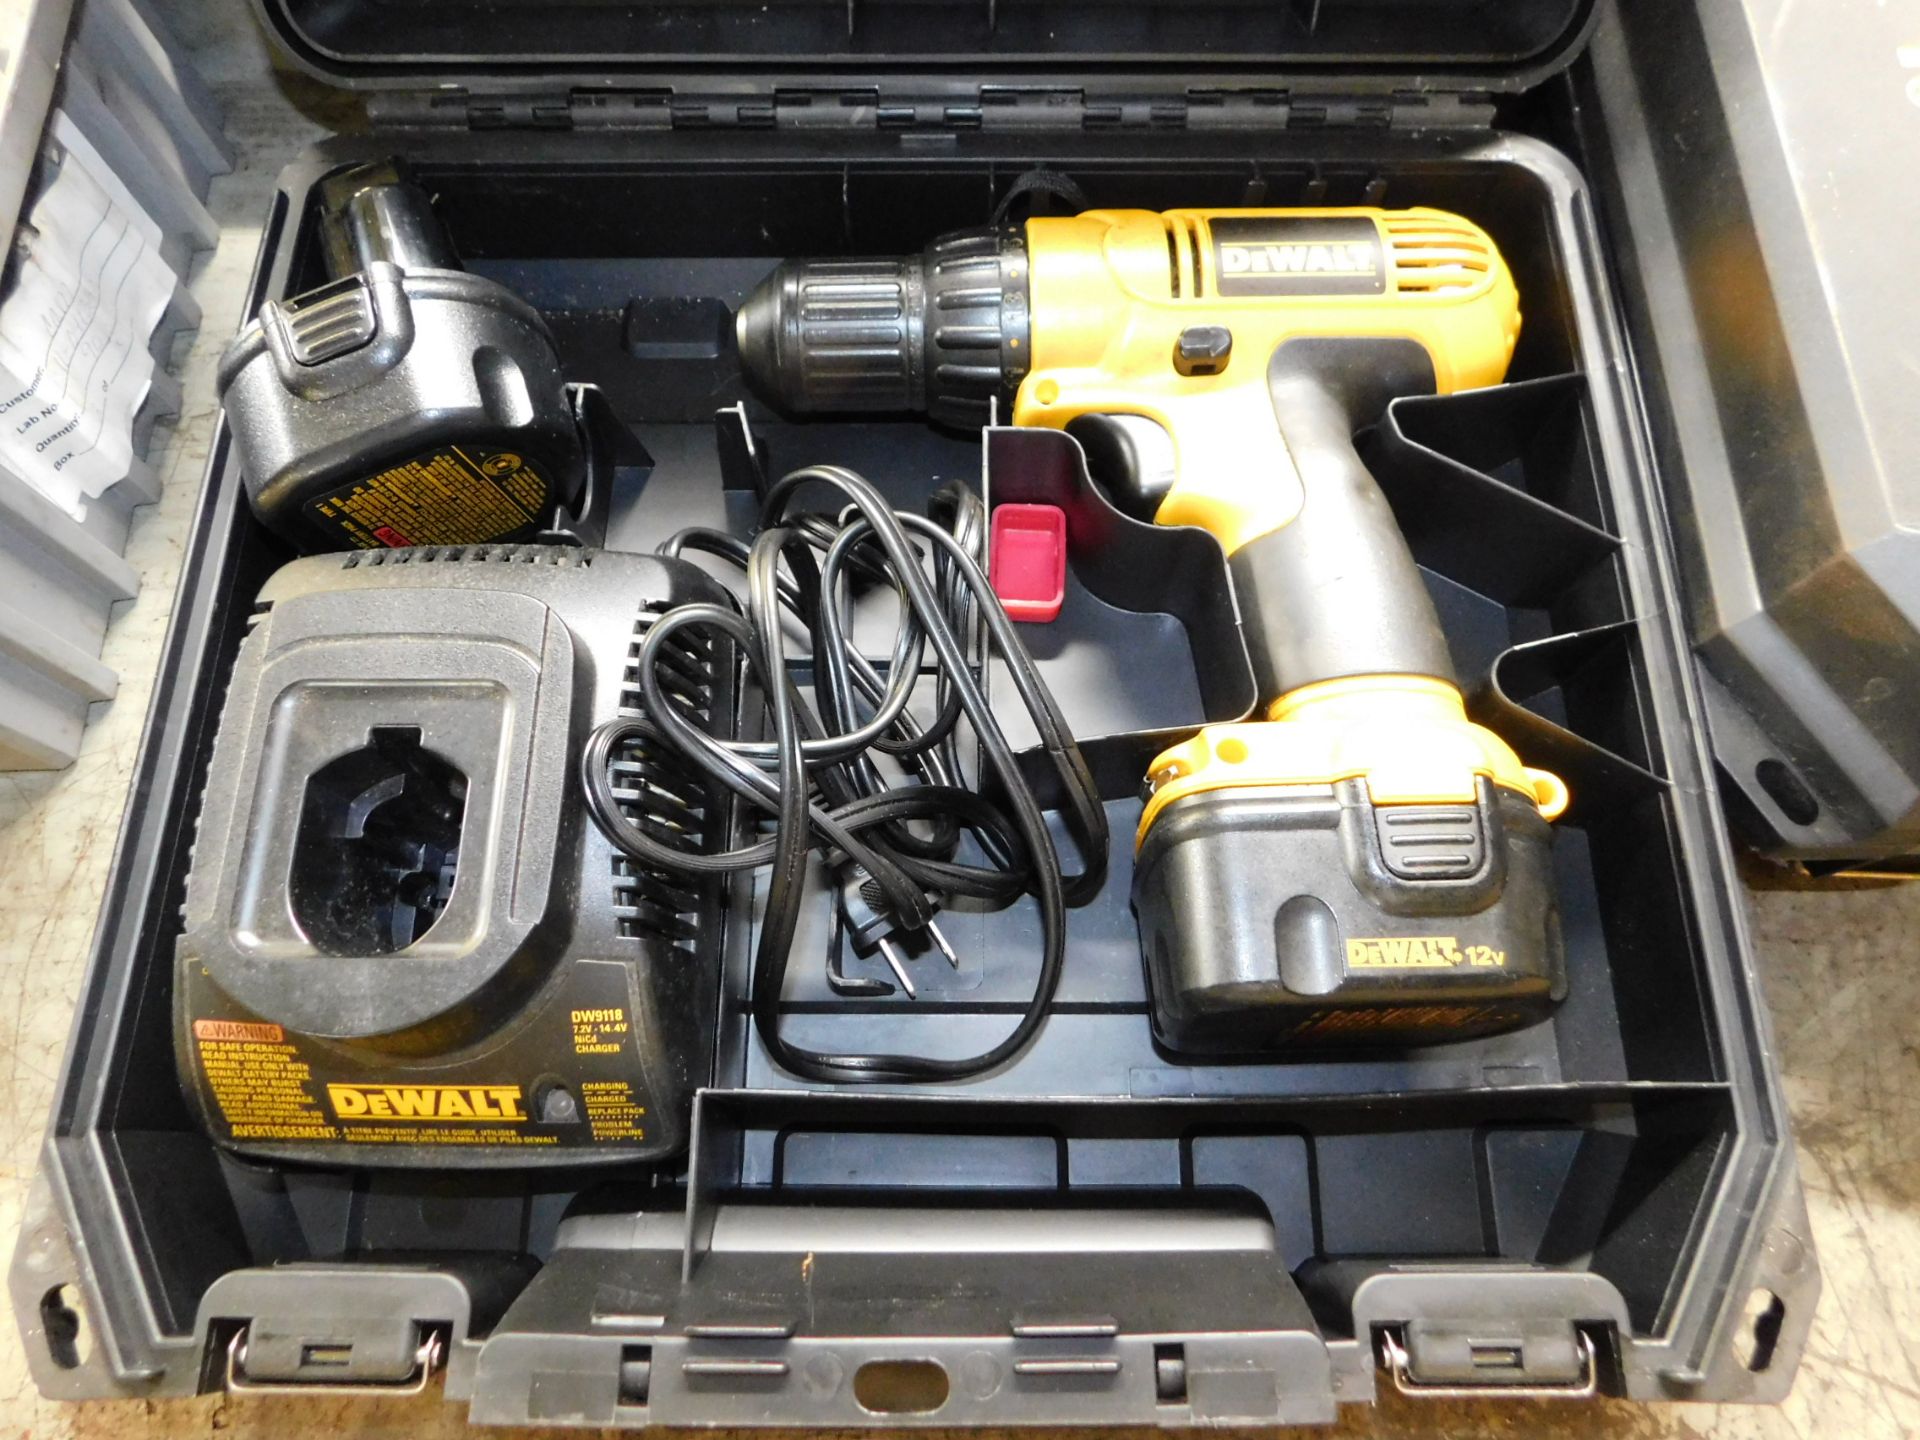 Dewalt 12V Cordless Drill with Charger and Case